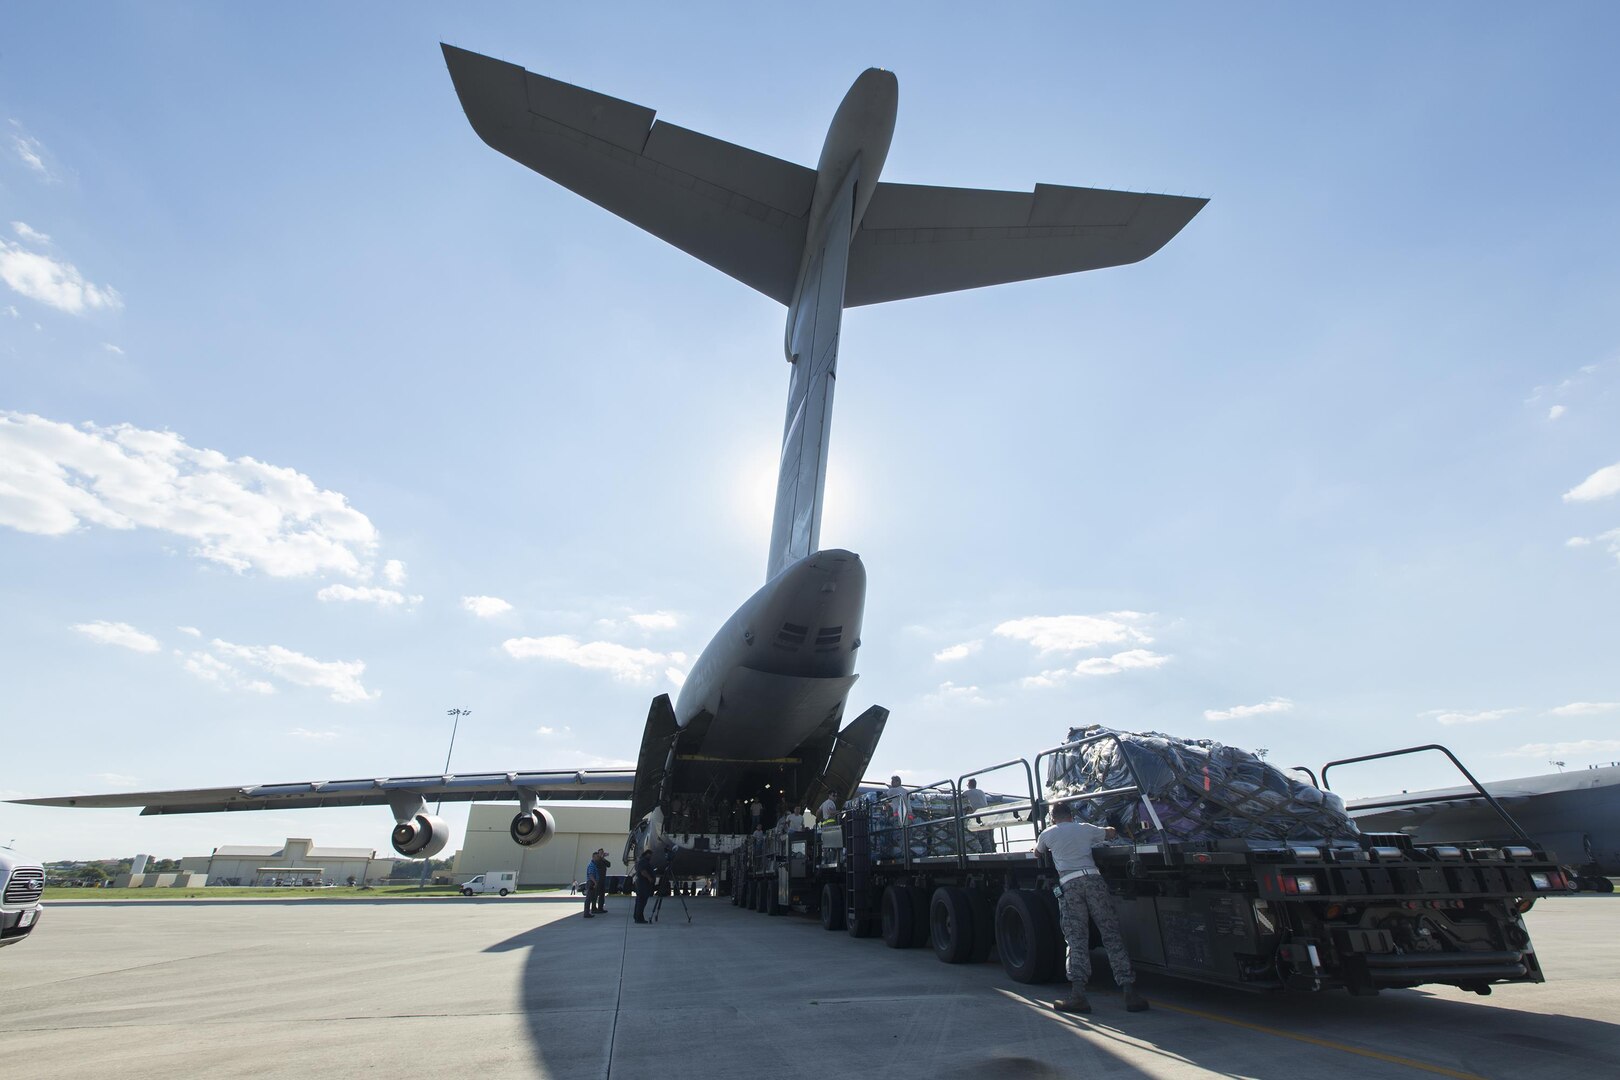 U.S. Air Force Personnel with 502nd Logistics Readiness Squadron load supplies and equipment on a military aircraft